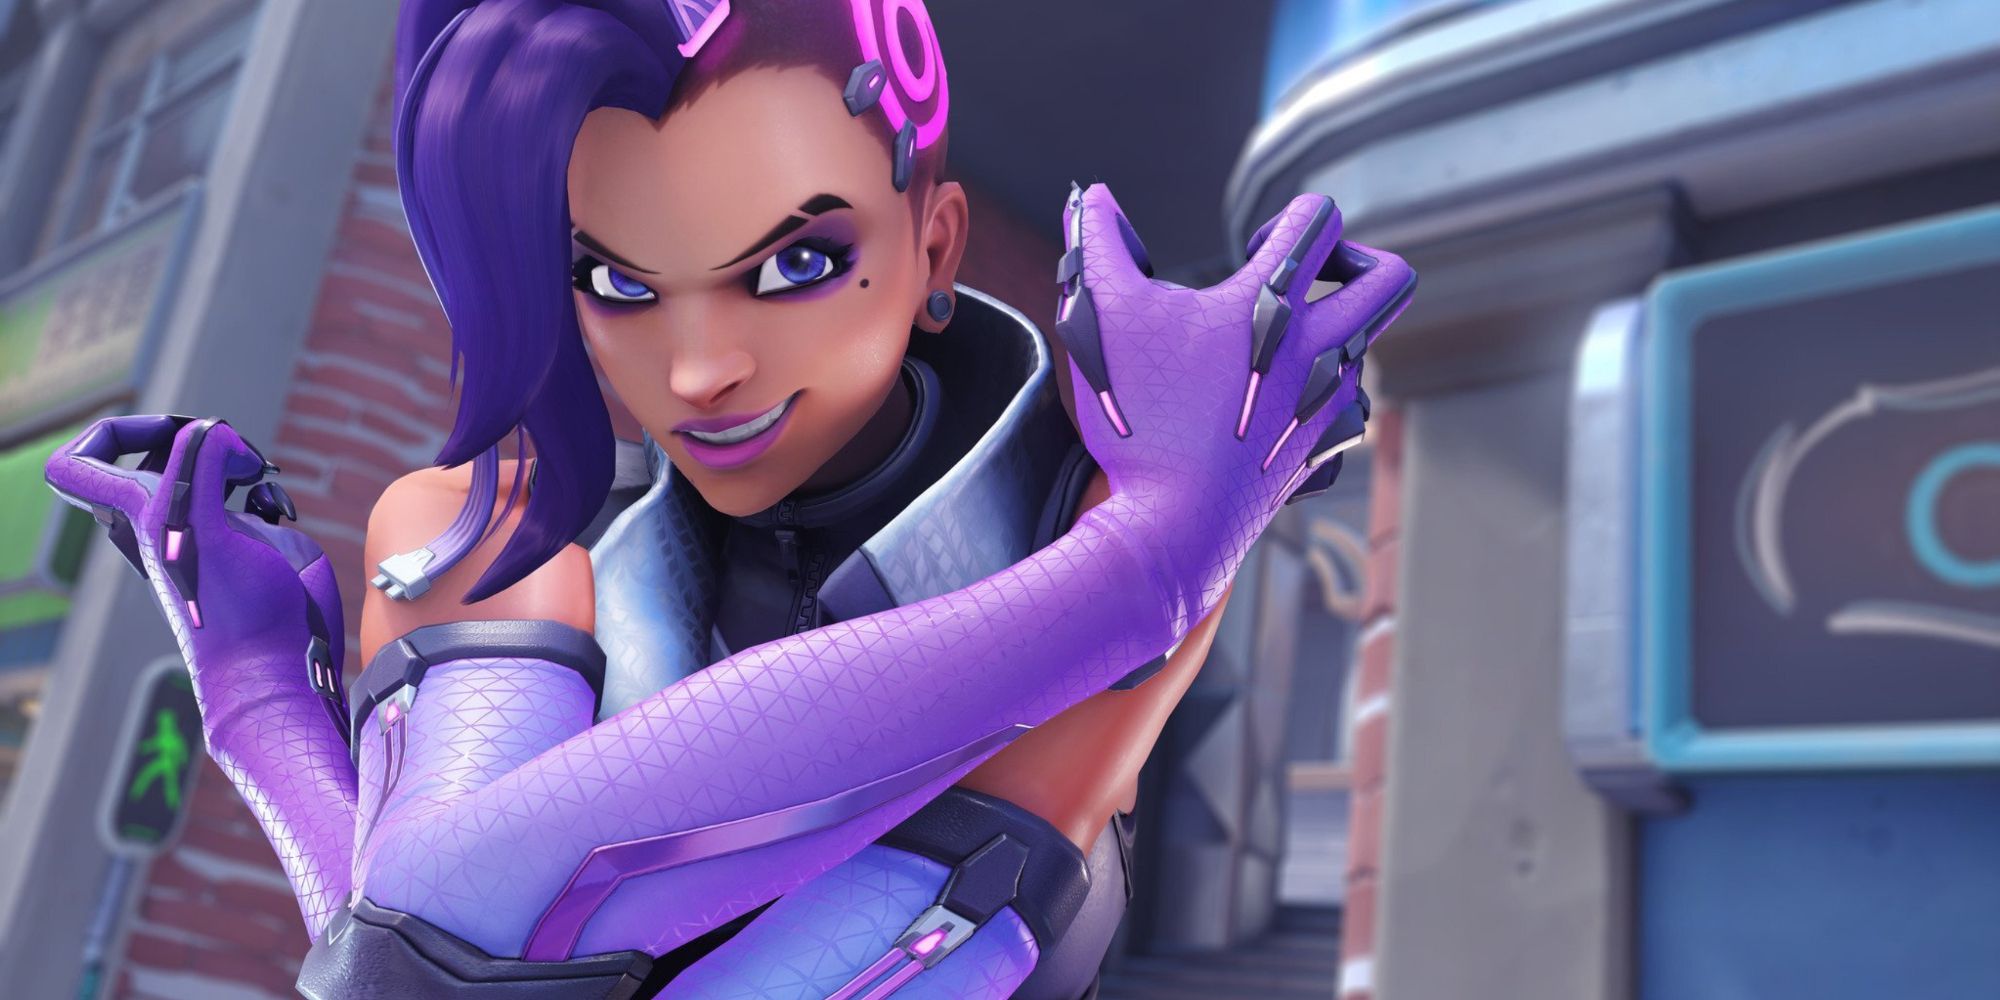 Sombra during a win pose